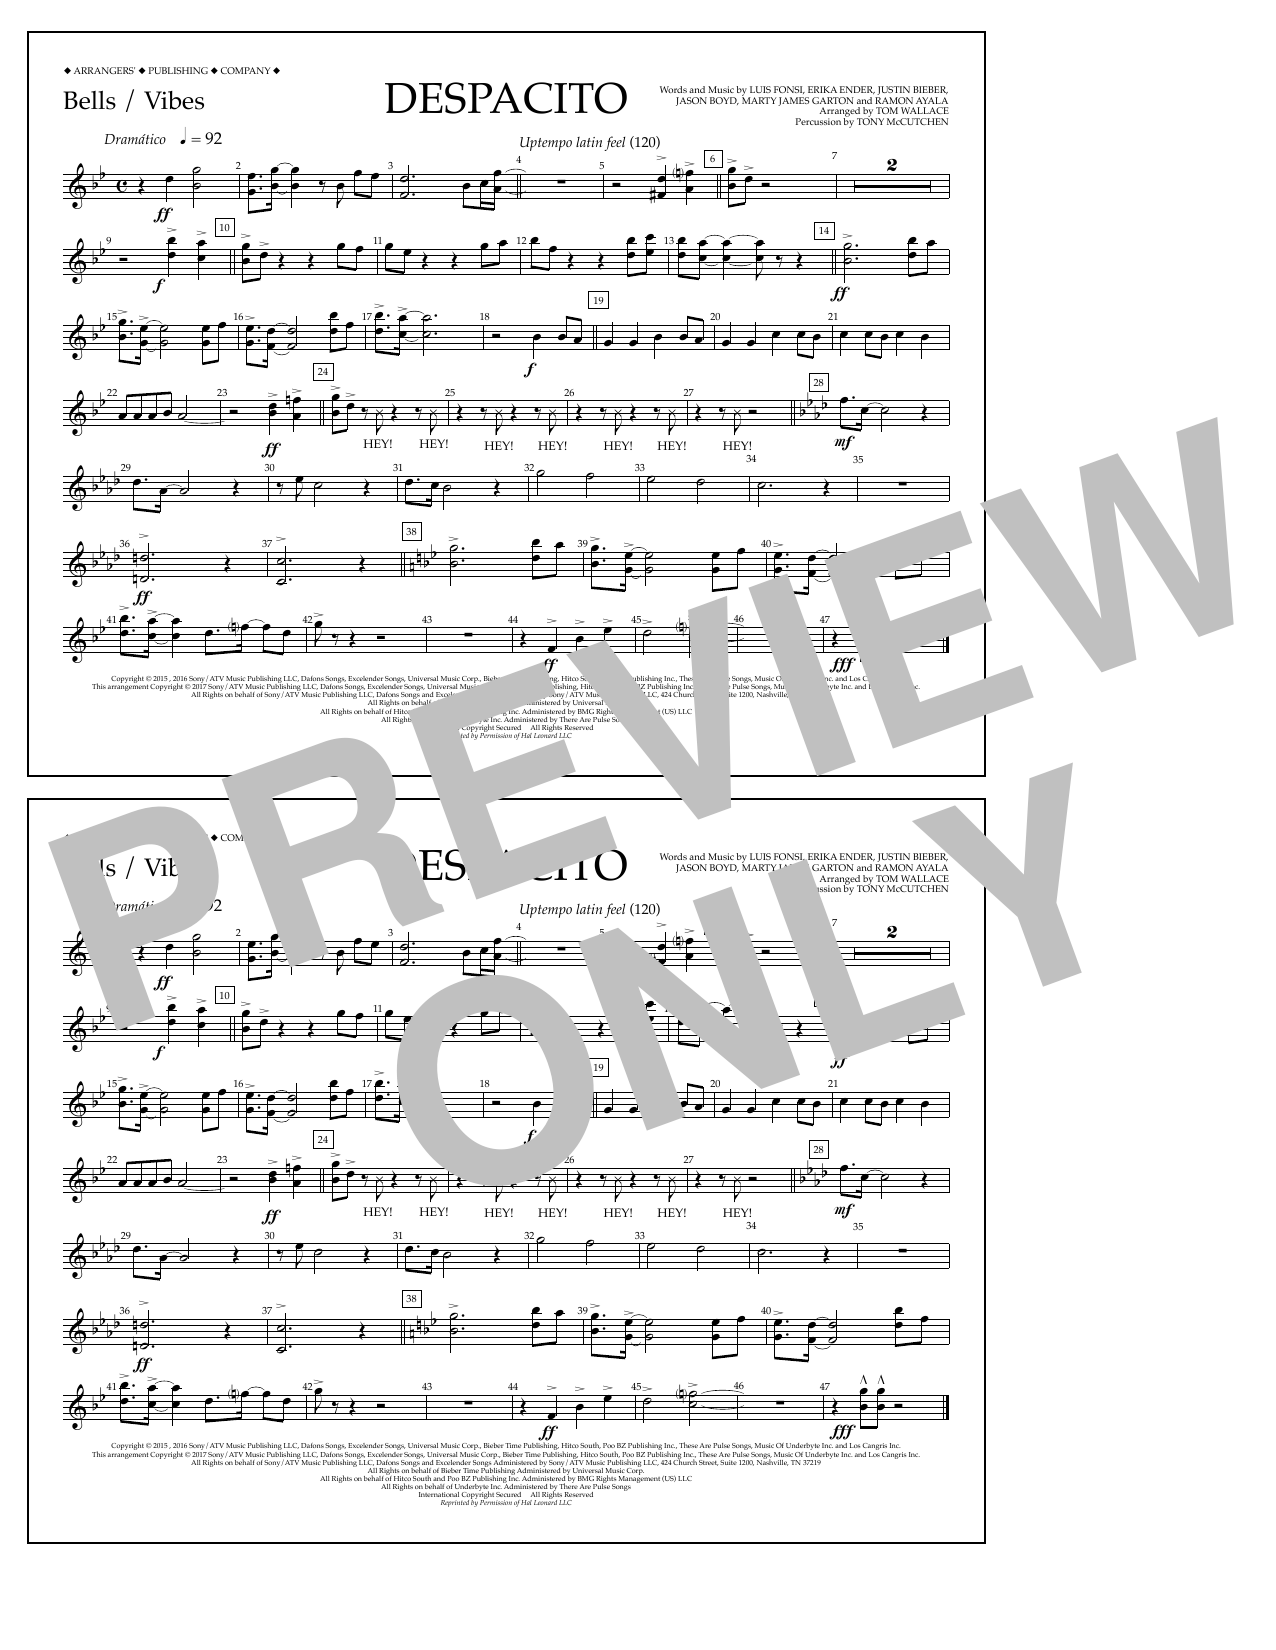 Download Tom Wallace Despacito - Bells/Vibes Sheet Music